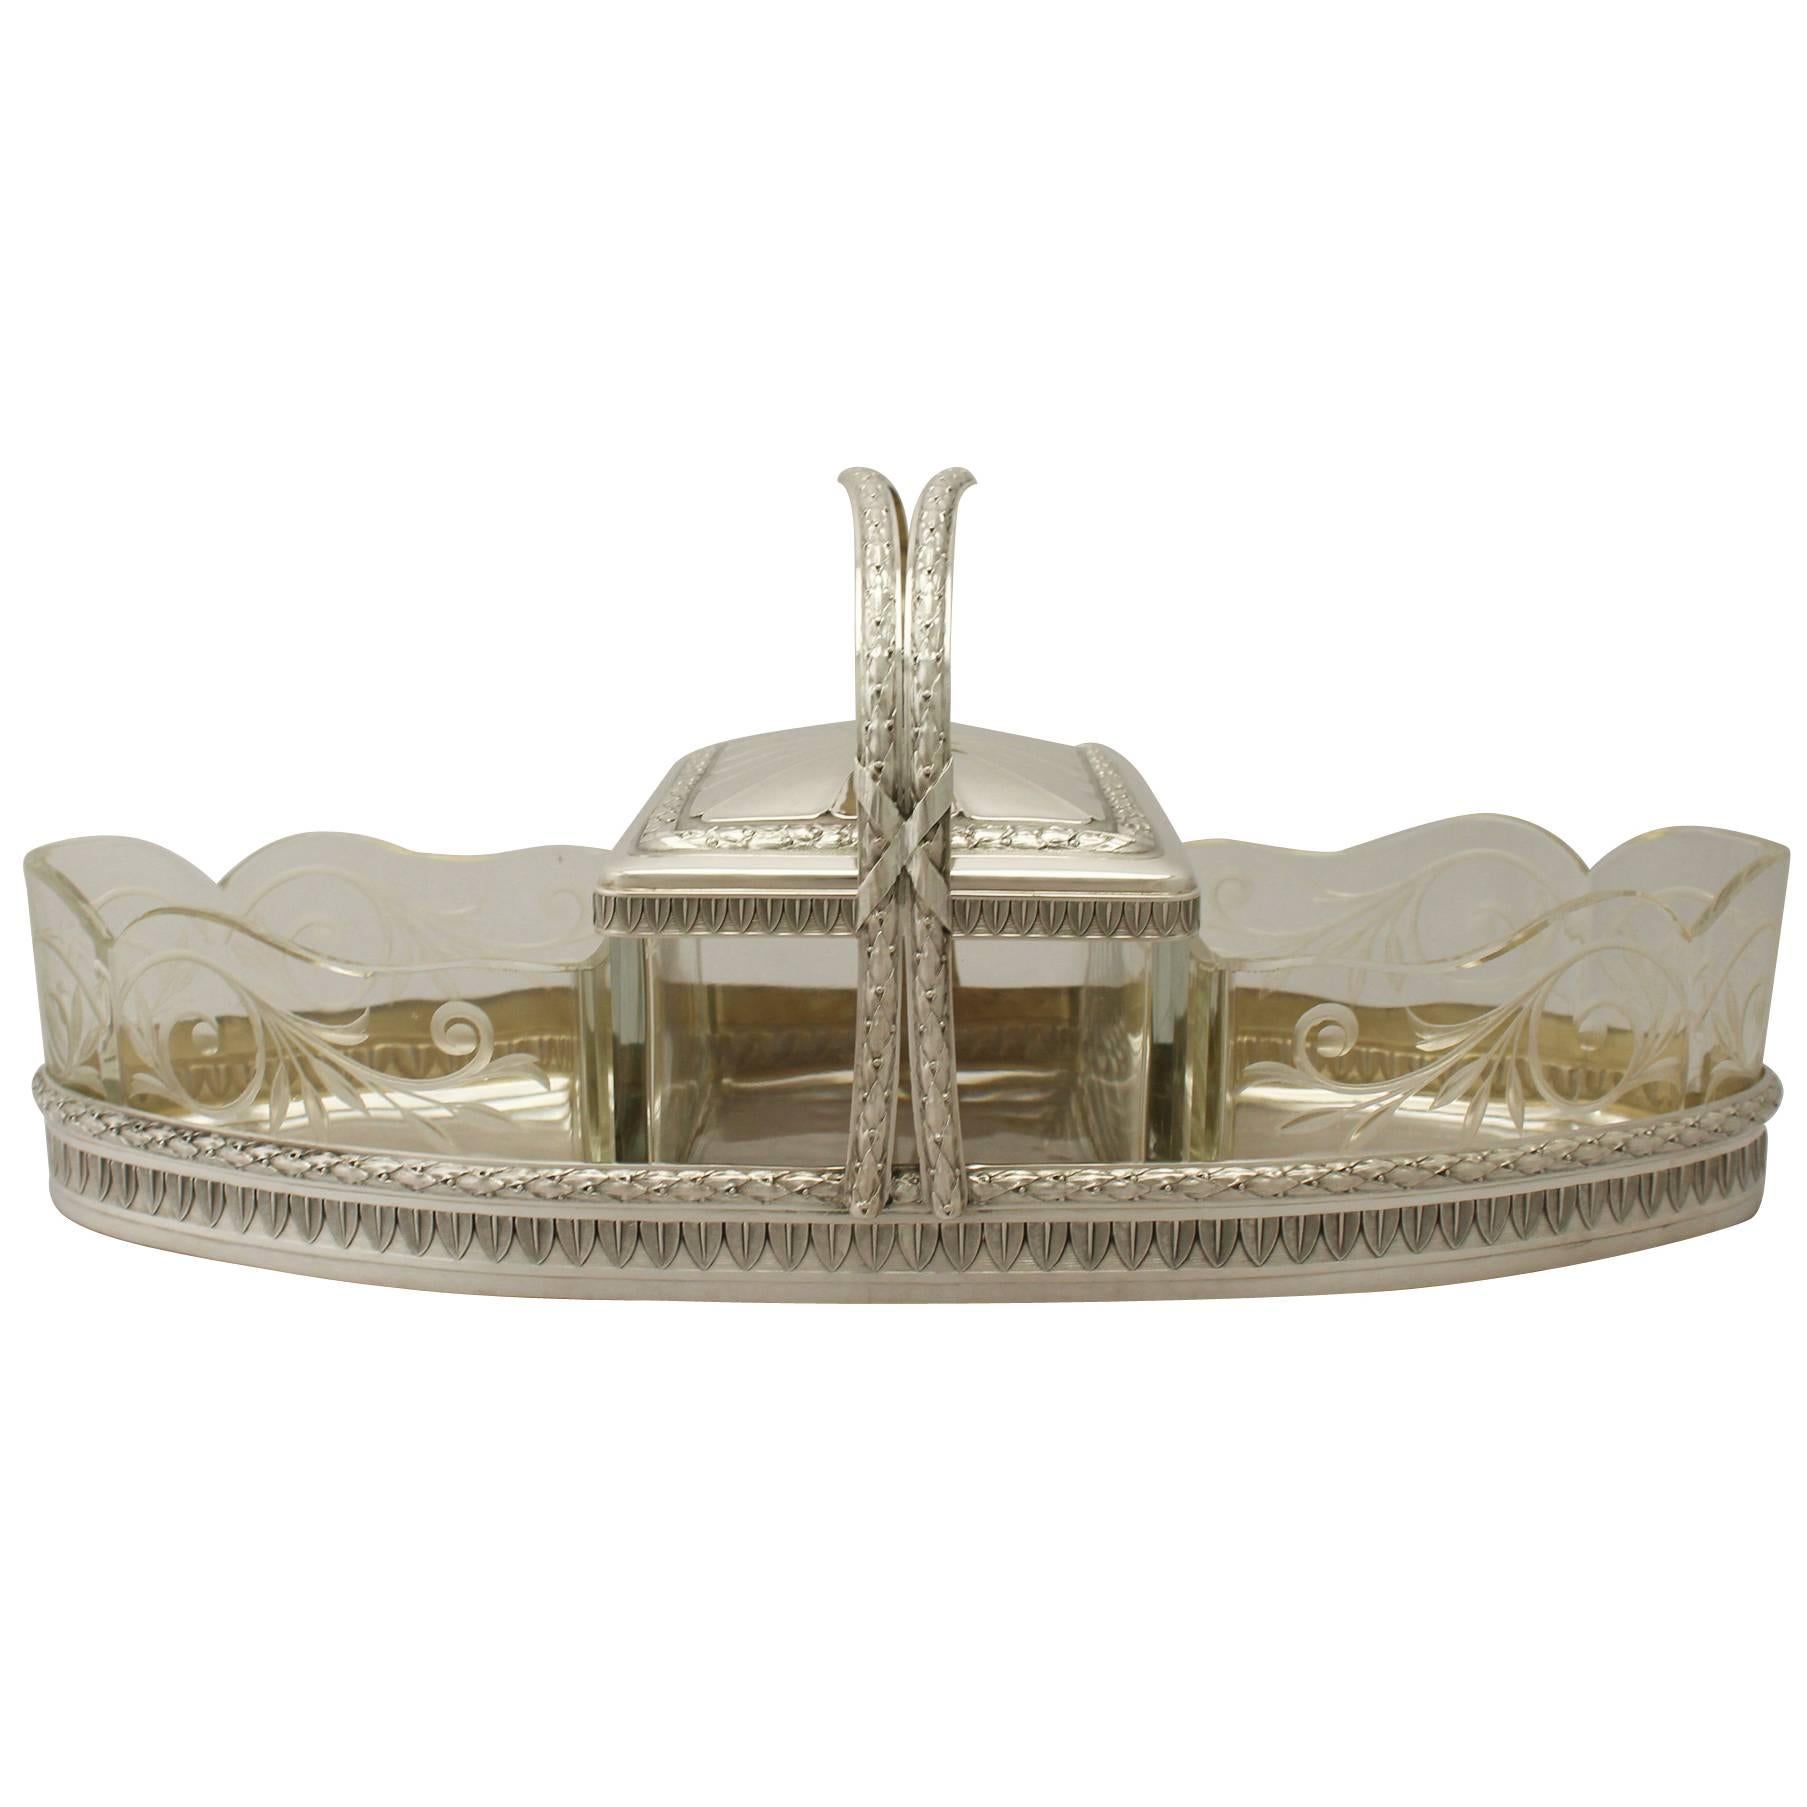 French Silver and Glass Centerpiece, Antique, circa 1900